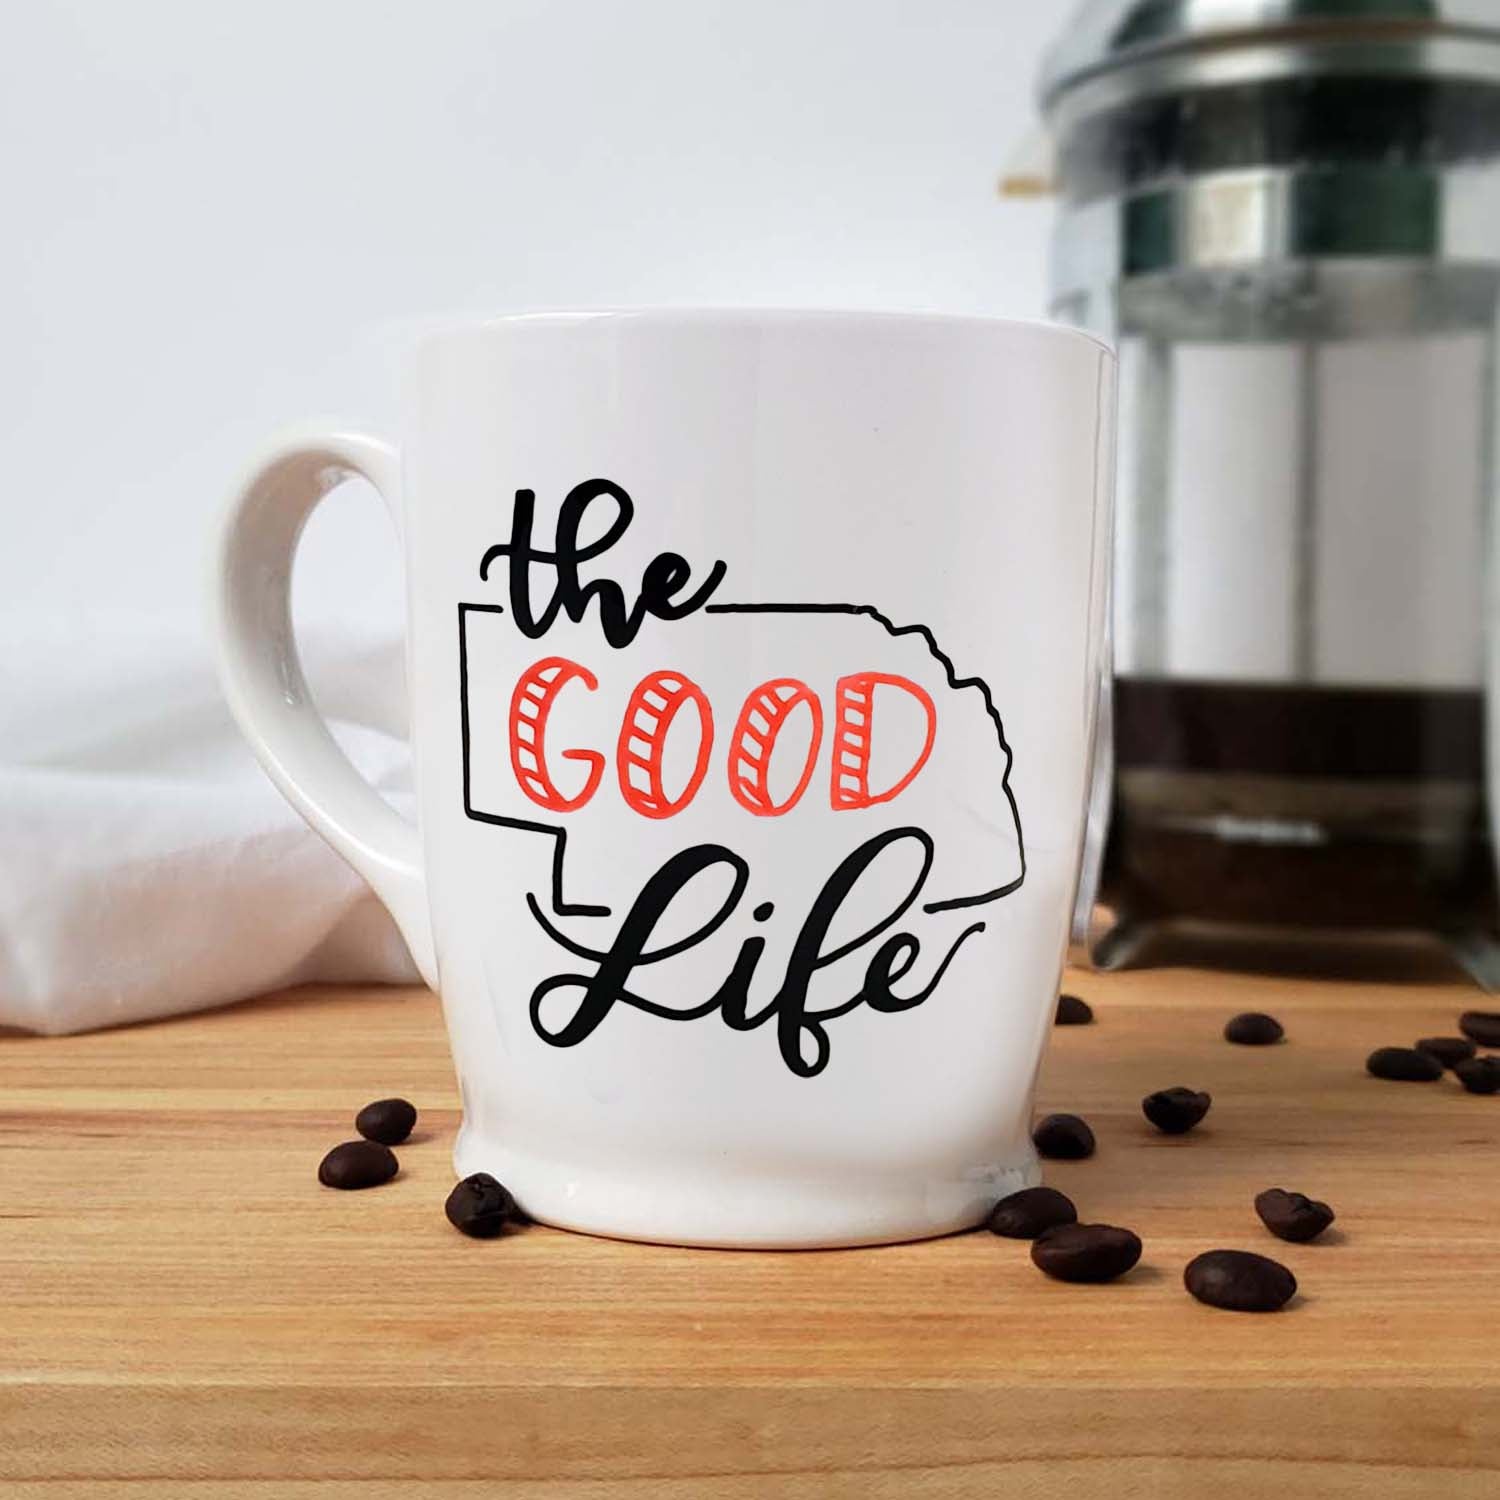 16 oz hand painted white ceramic coffee mug that says the good life with the outline of the state of Nebraska in red and black hand lettering shown with scattered coffee beans and a french press and floursack towel in the background